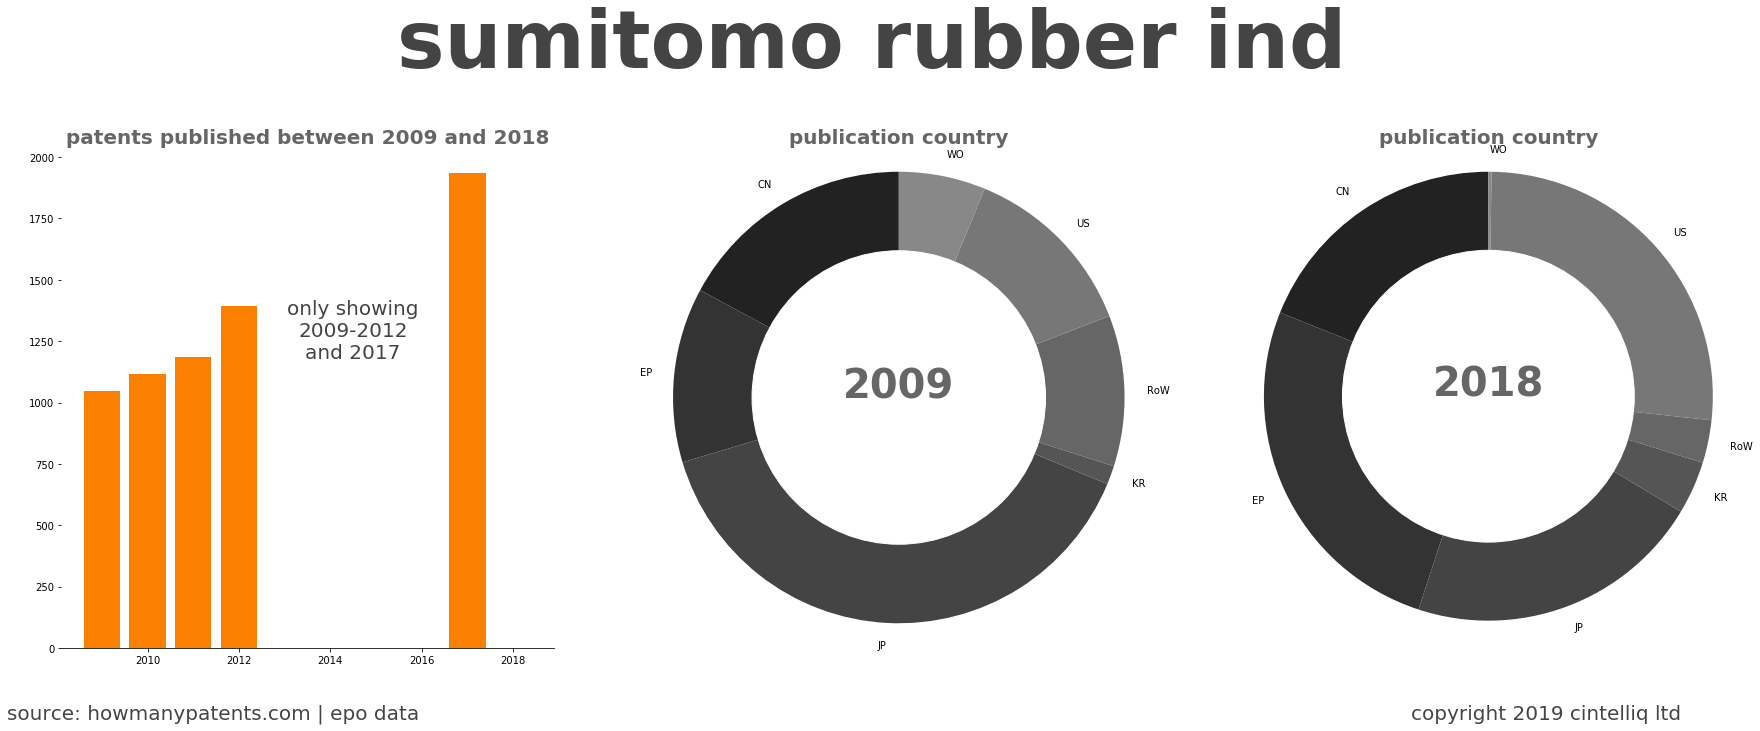 summary of patents for Sumitomo Rubber Ind